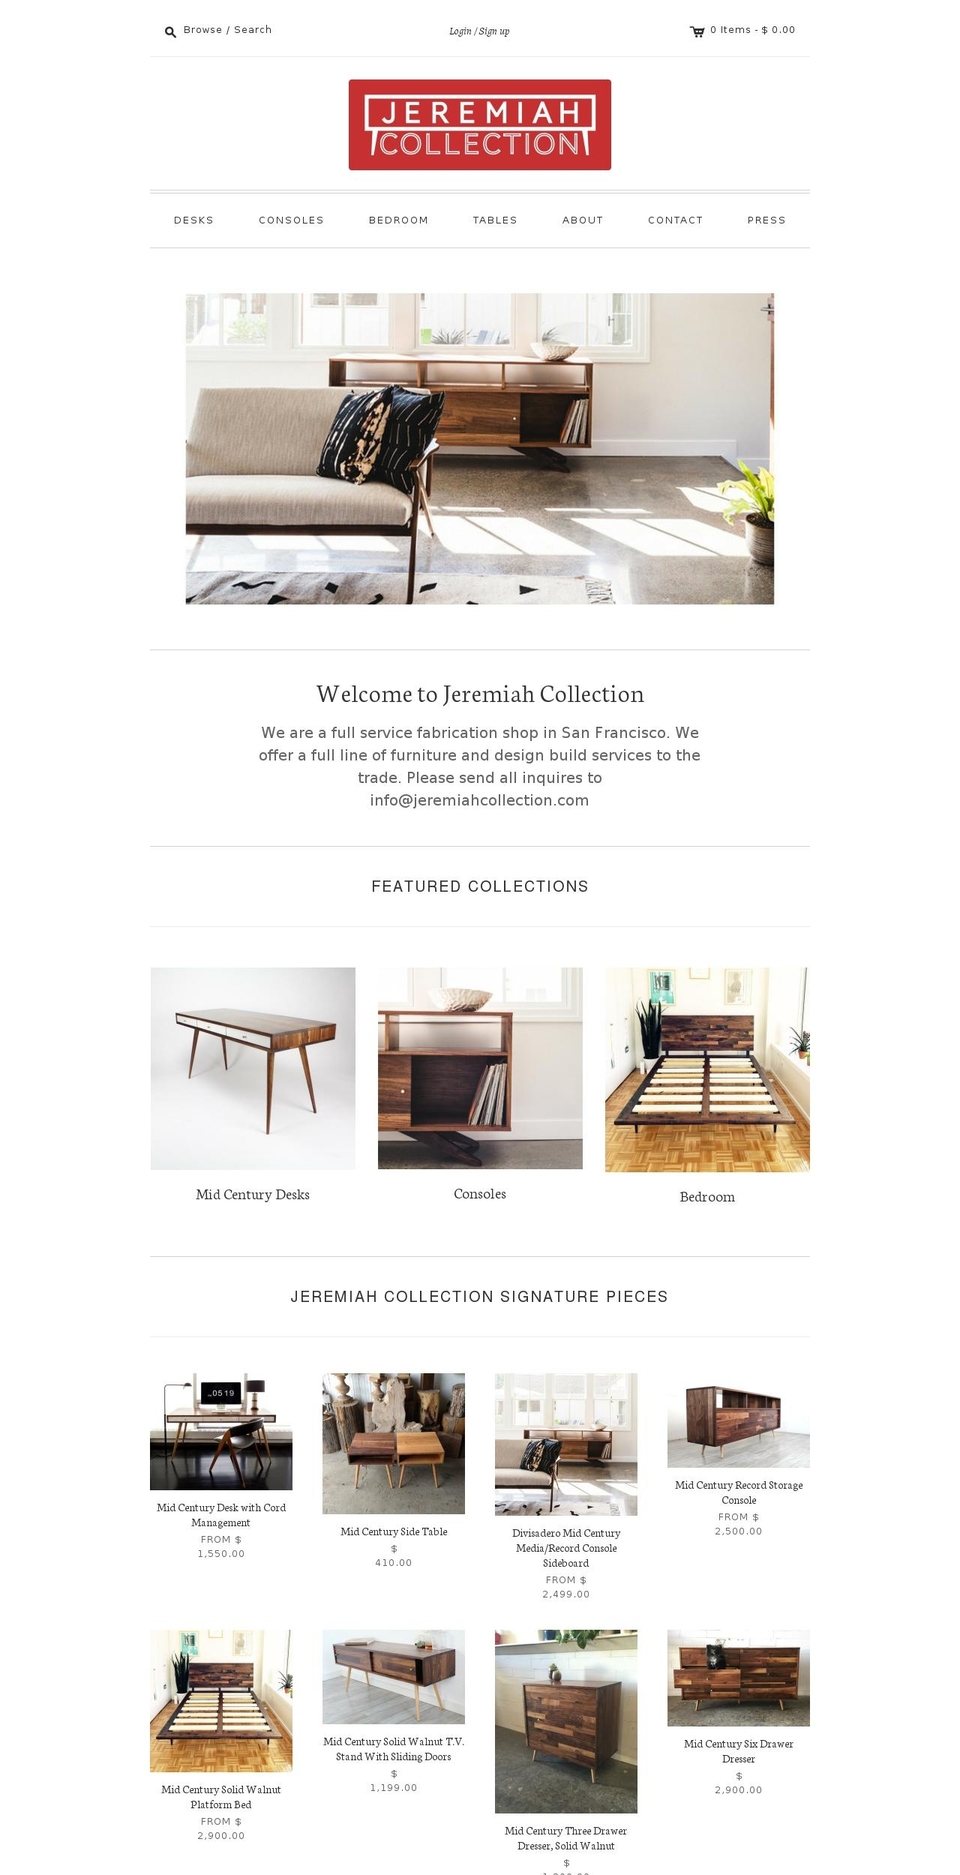 Editions Shopify theme site example jeremiahcollection.com